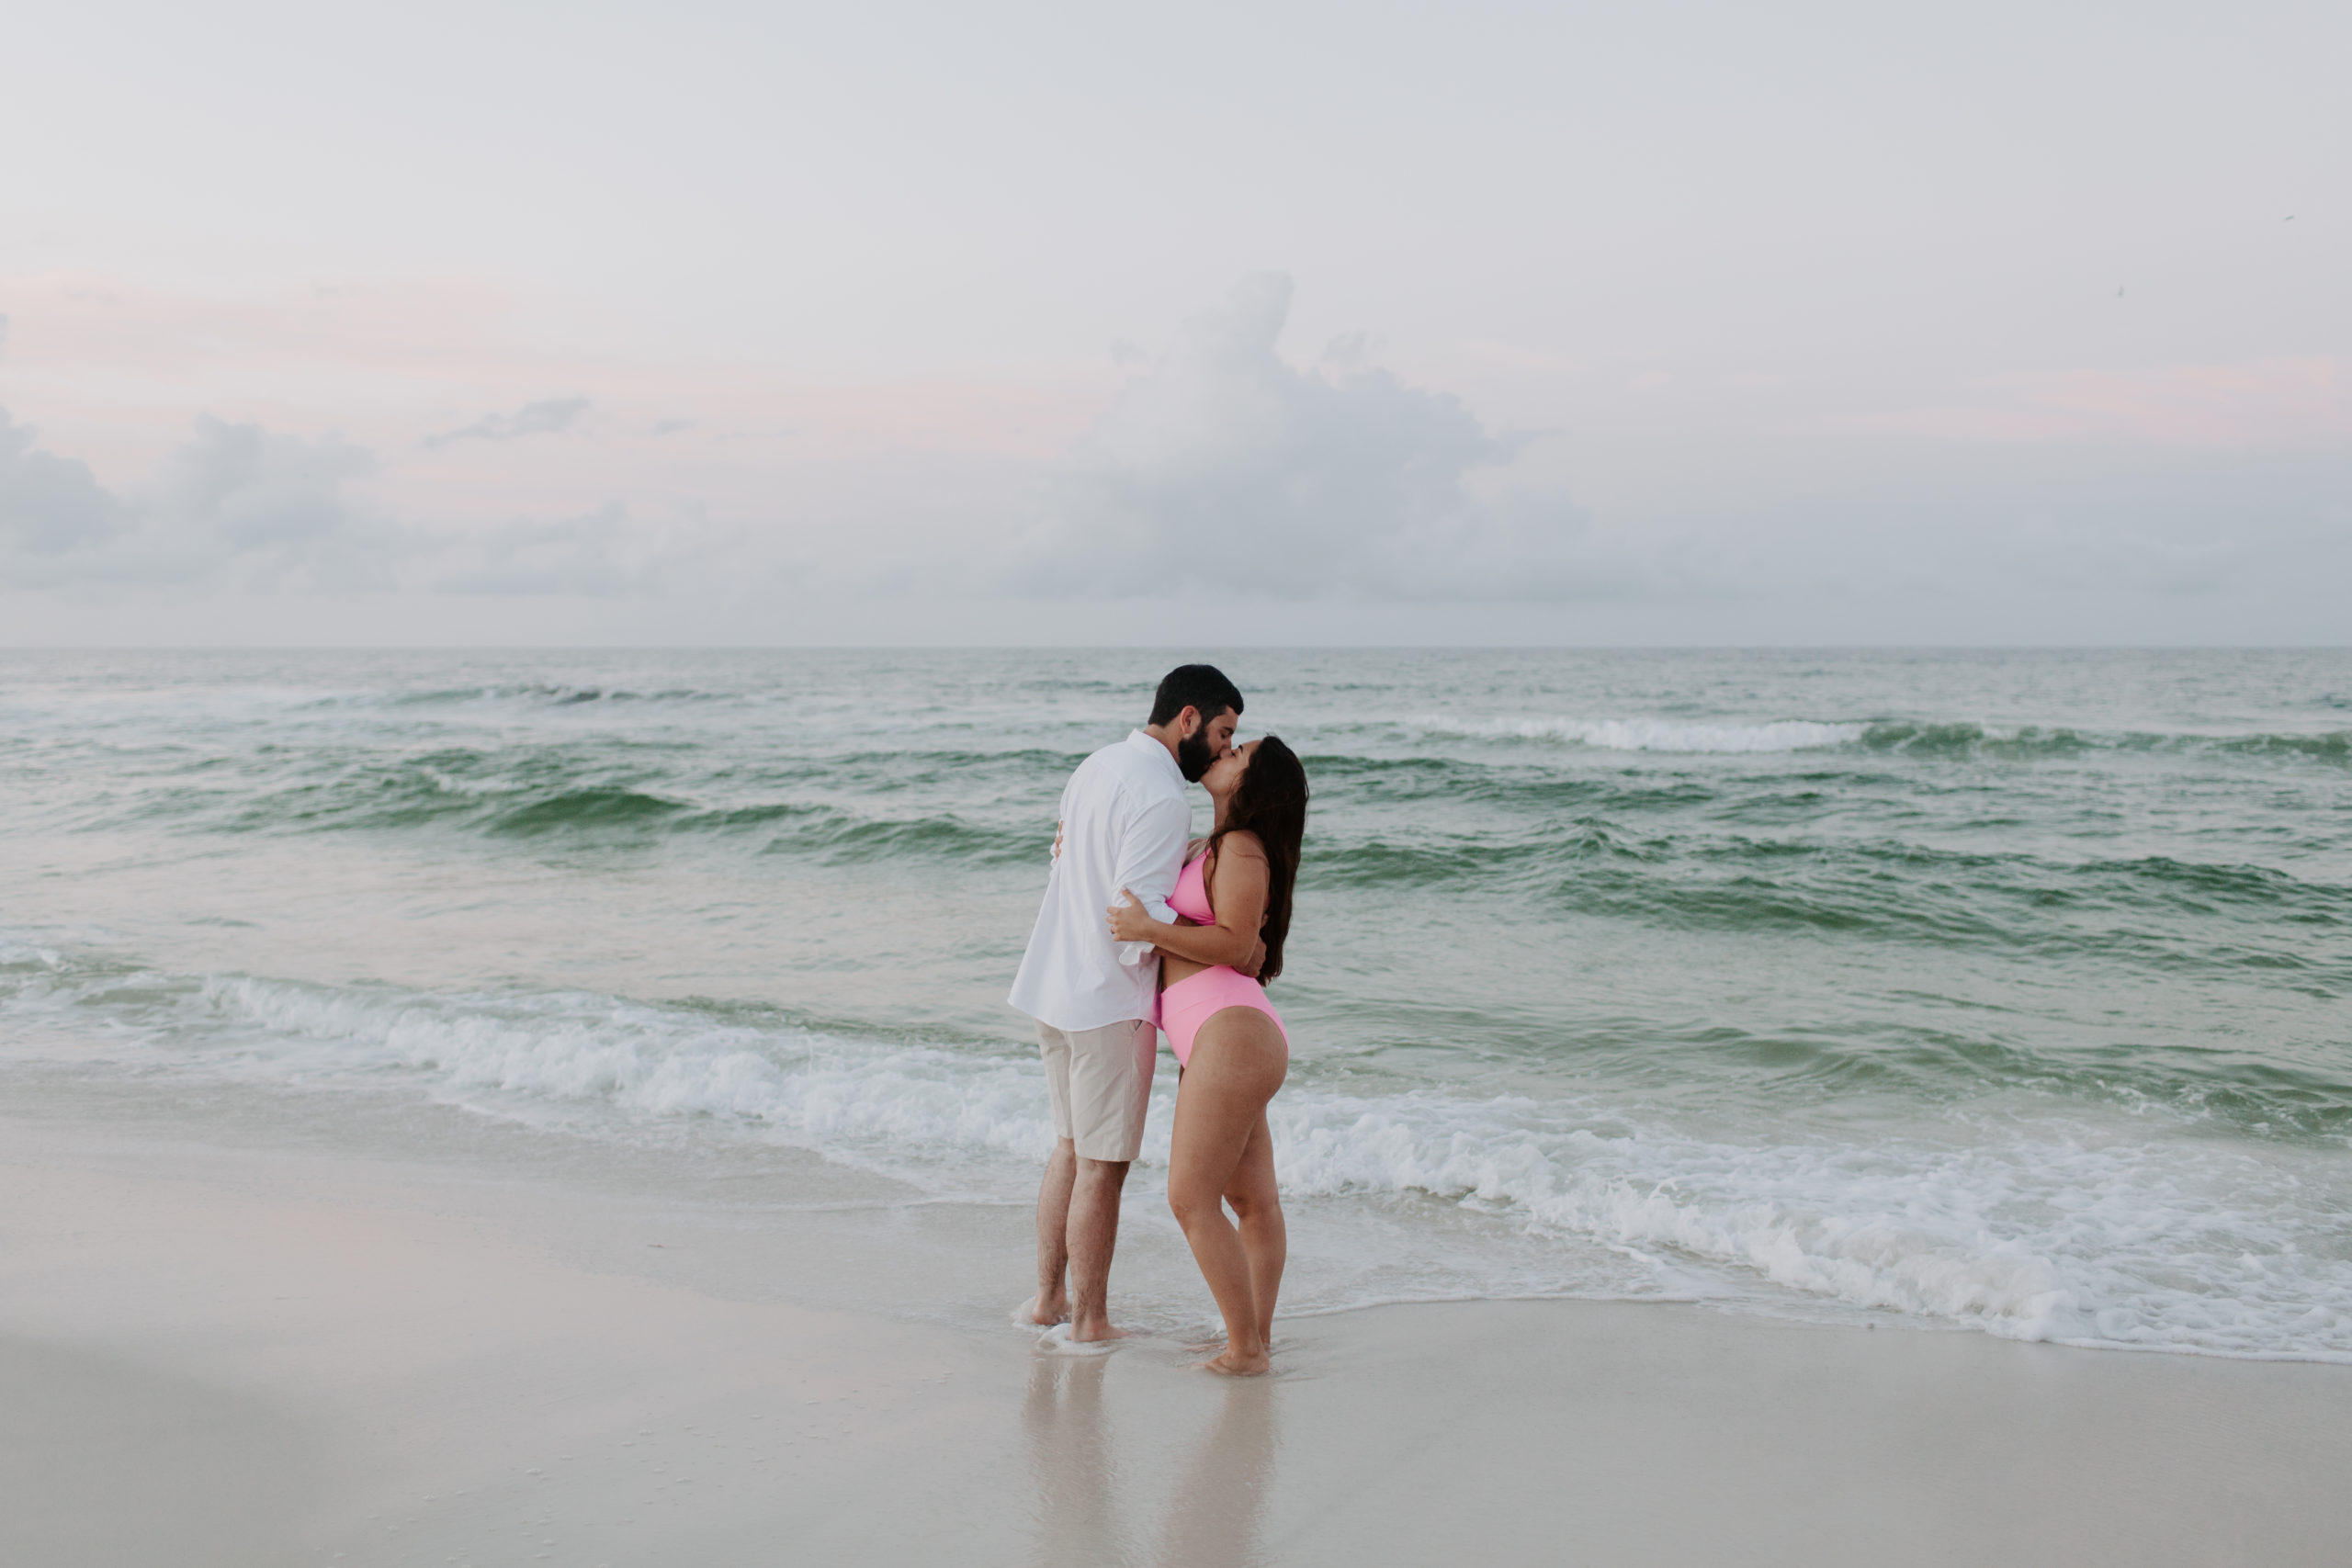 A man and a woman standing at the ocean line in their swimsuits sharing a kiss as the sun rises